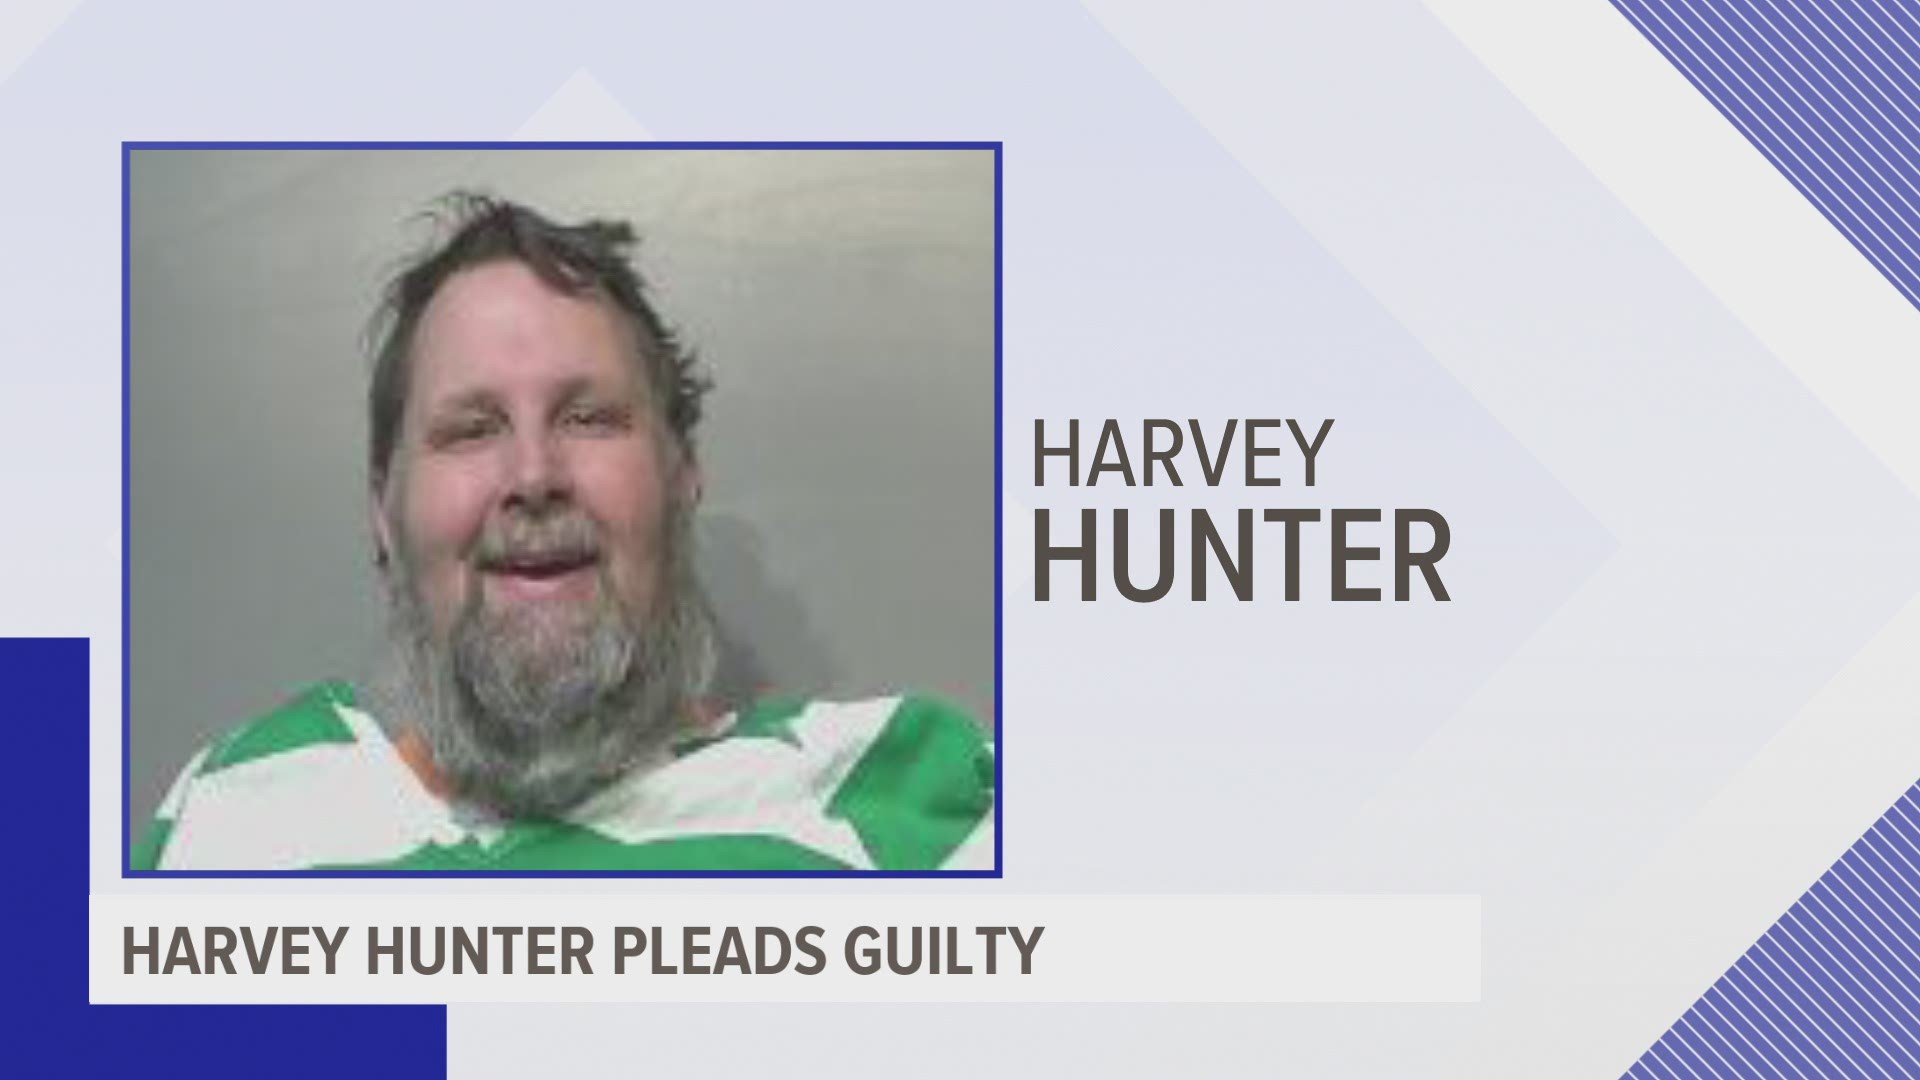 Harvey Hunter Jr., 48, pleaded guilty to second-degree harassment after leaving a threatening voicemail for Gov. Reynolds after lifting the mask mandate.